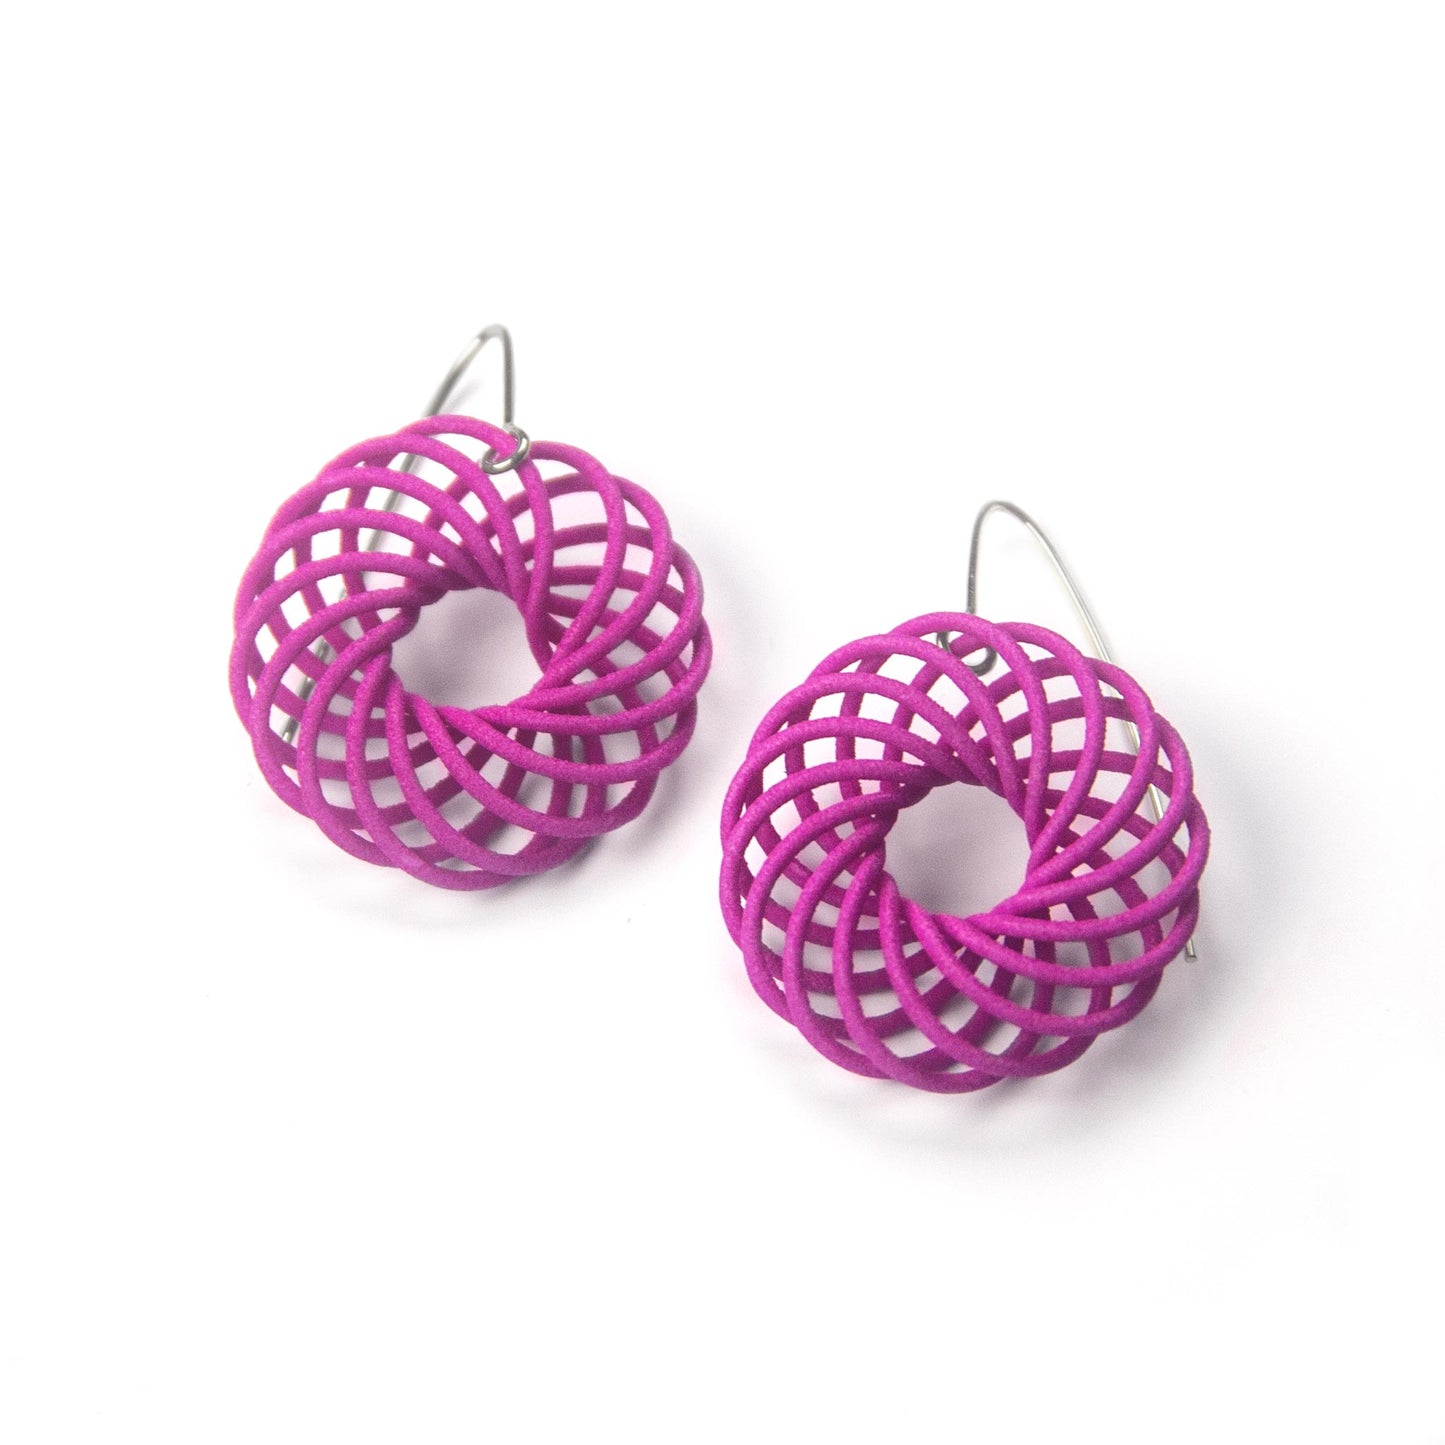 Small pink Vortex 3D printed nylon earrings by Katy Luxton